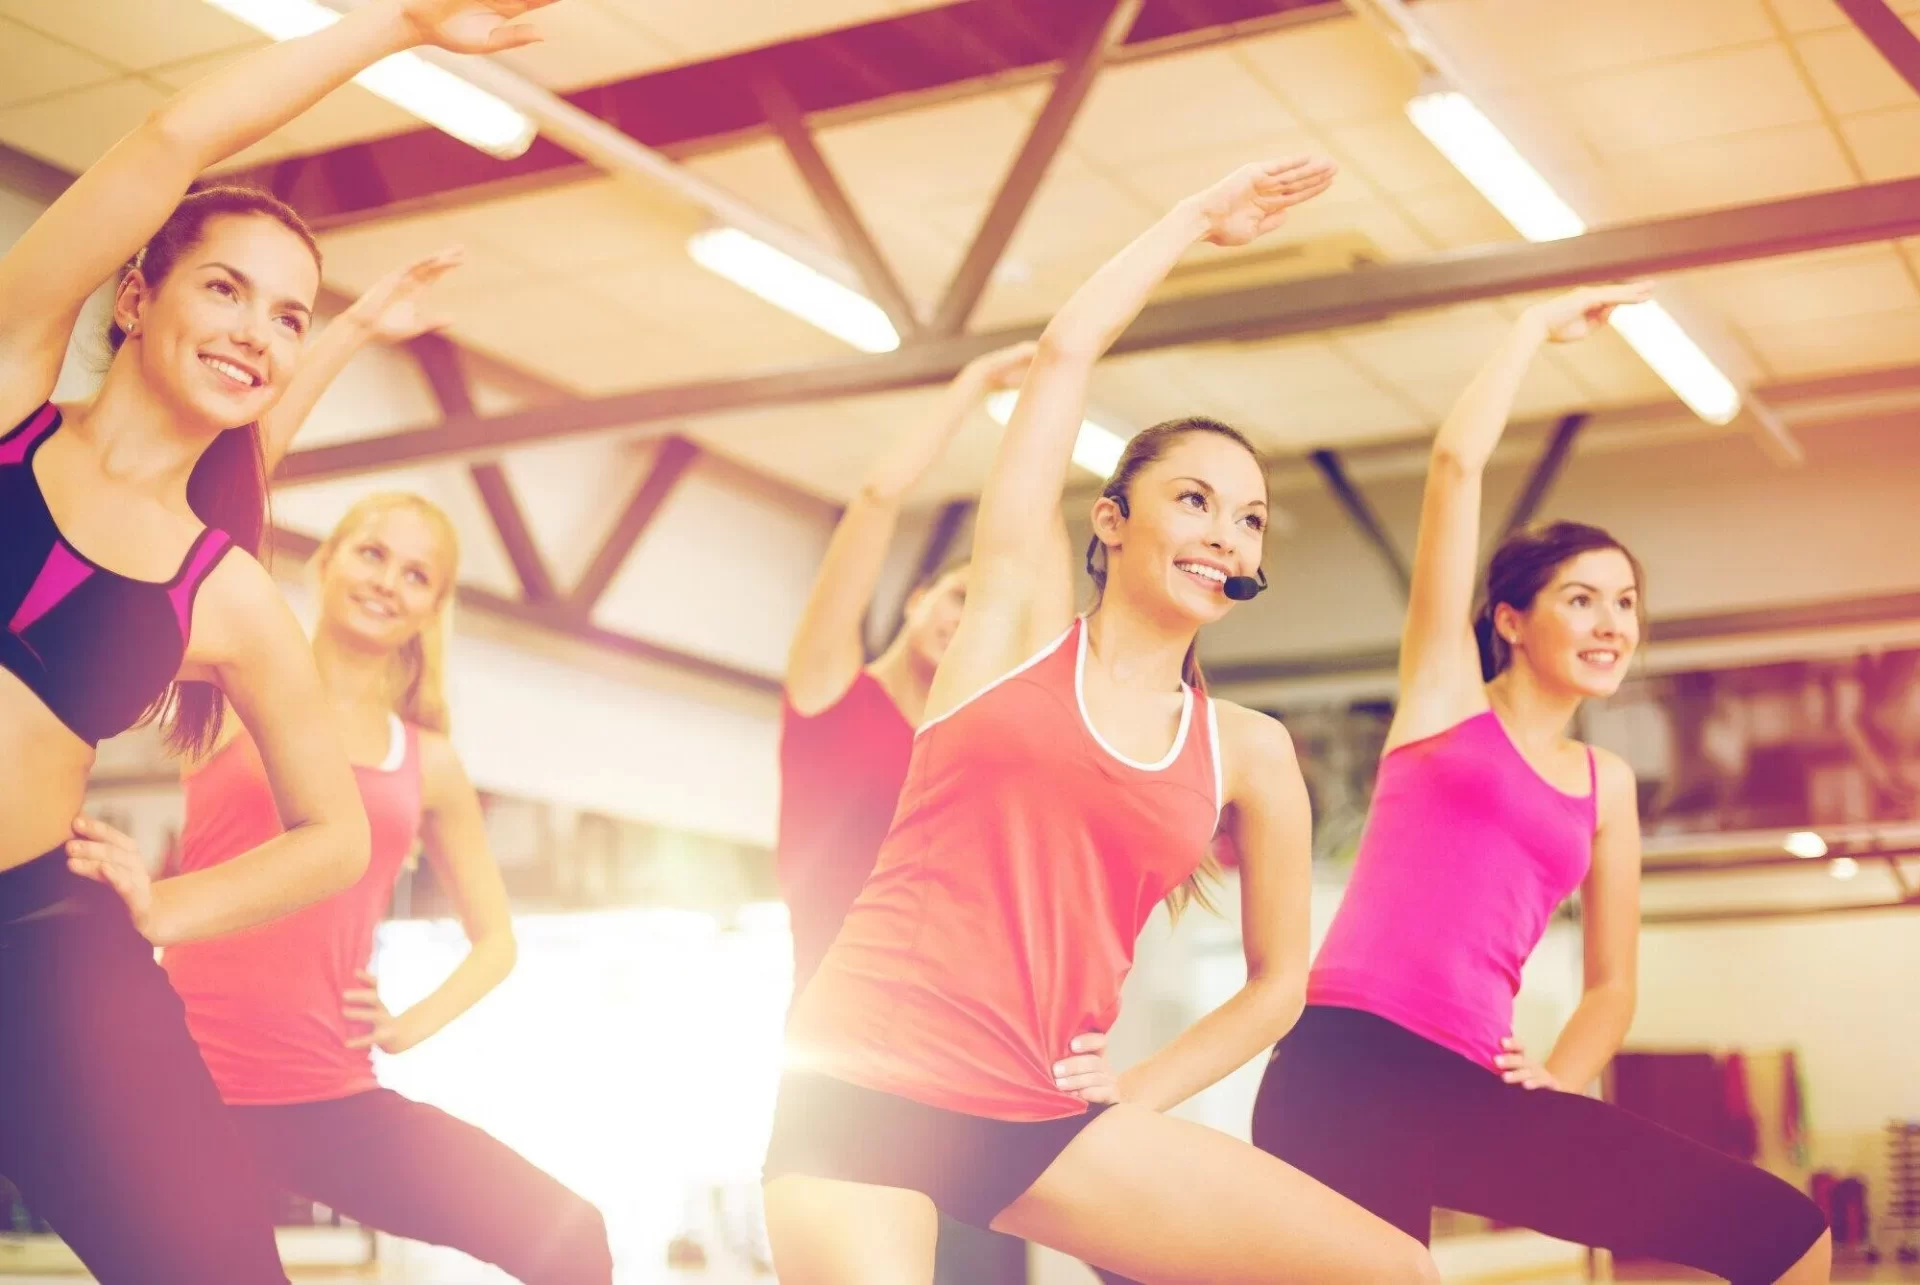 A Guide to Getting Your Certifications for Fitness Instructor Jobs